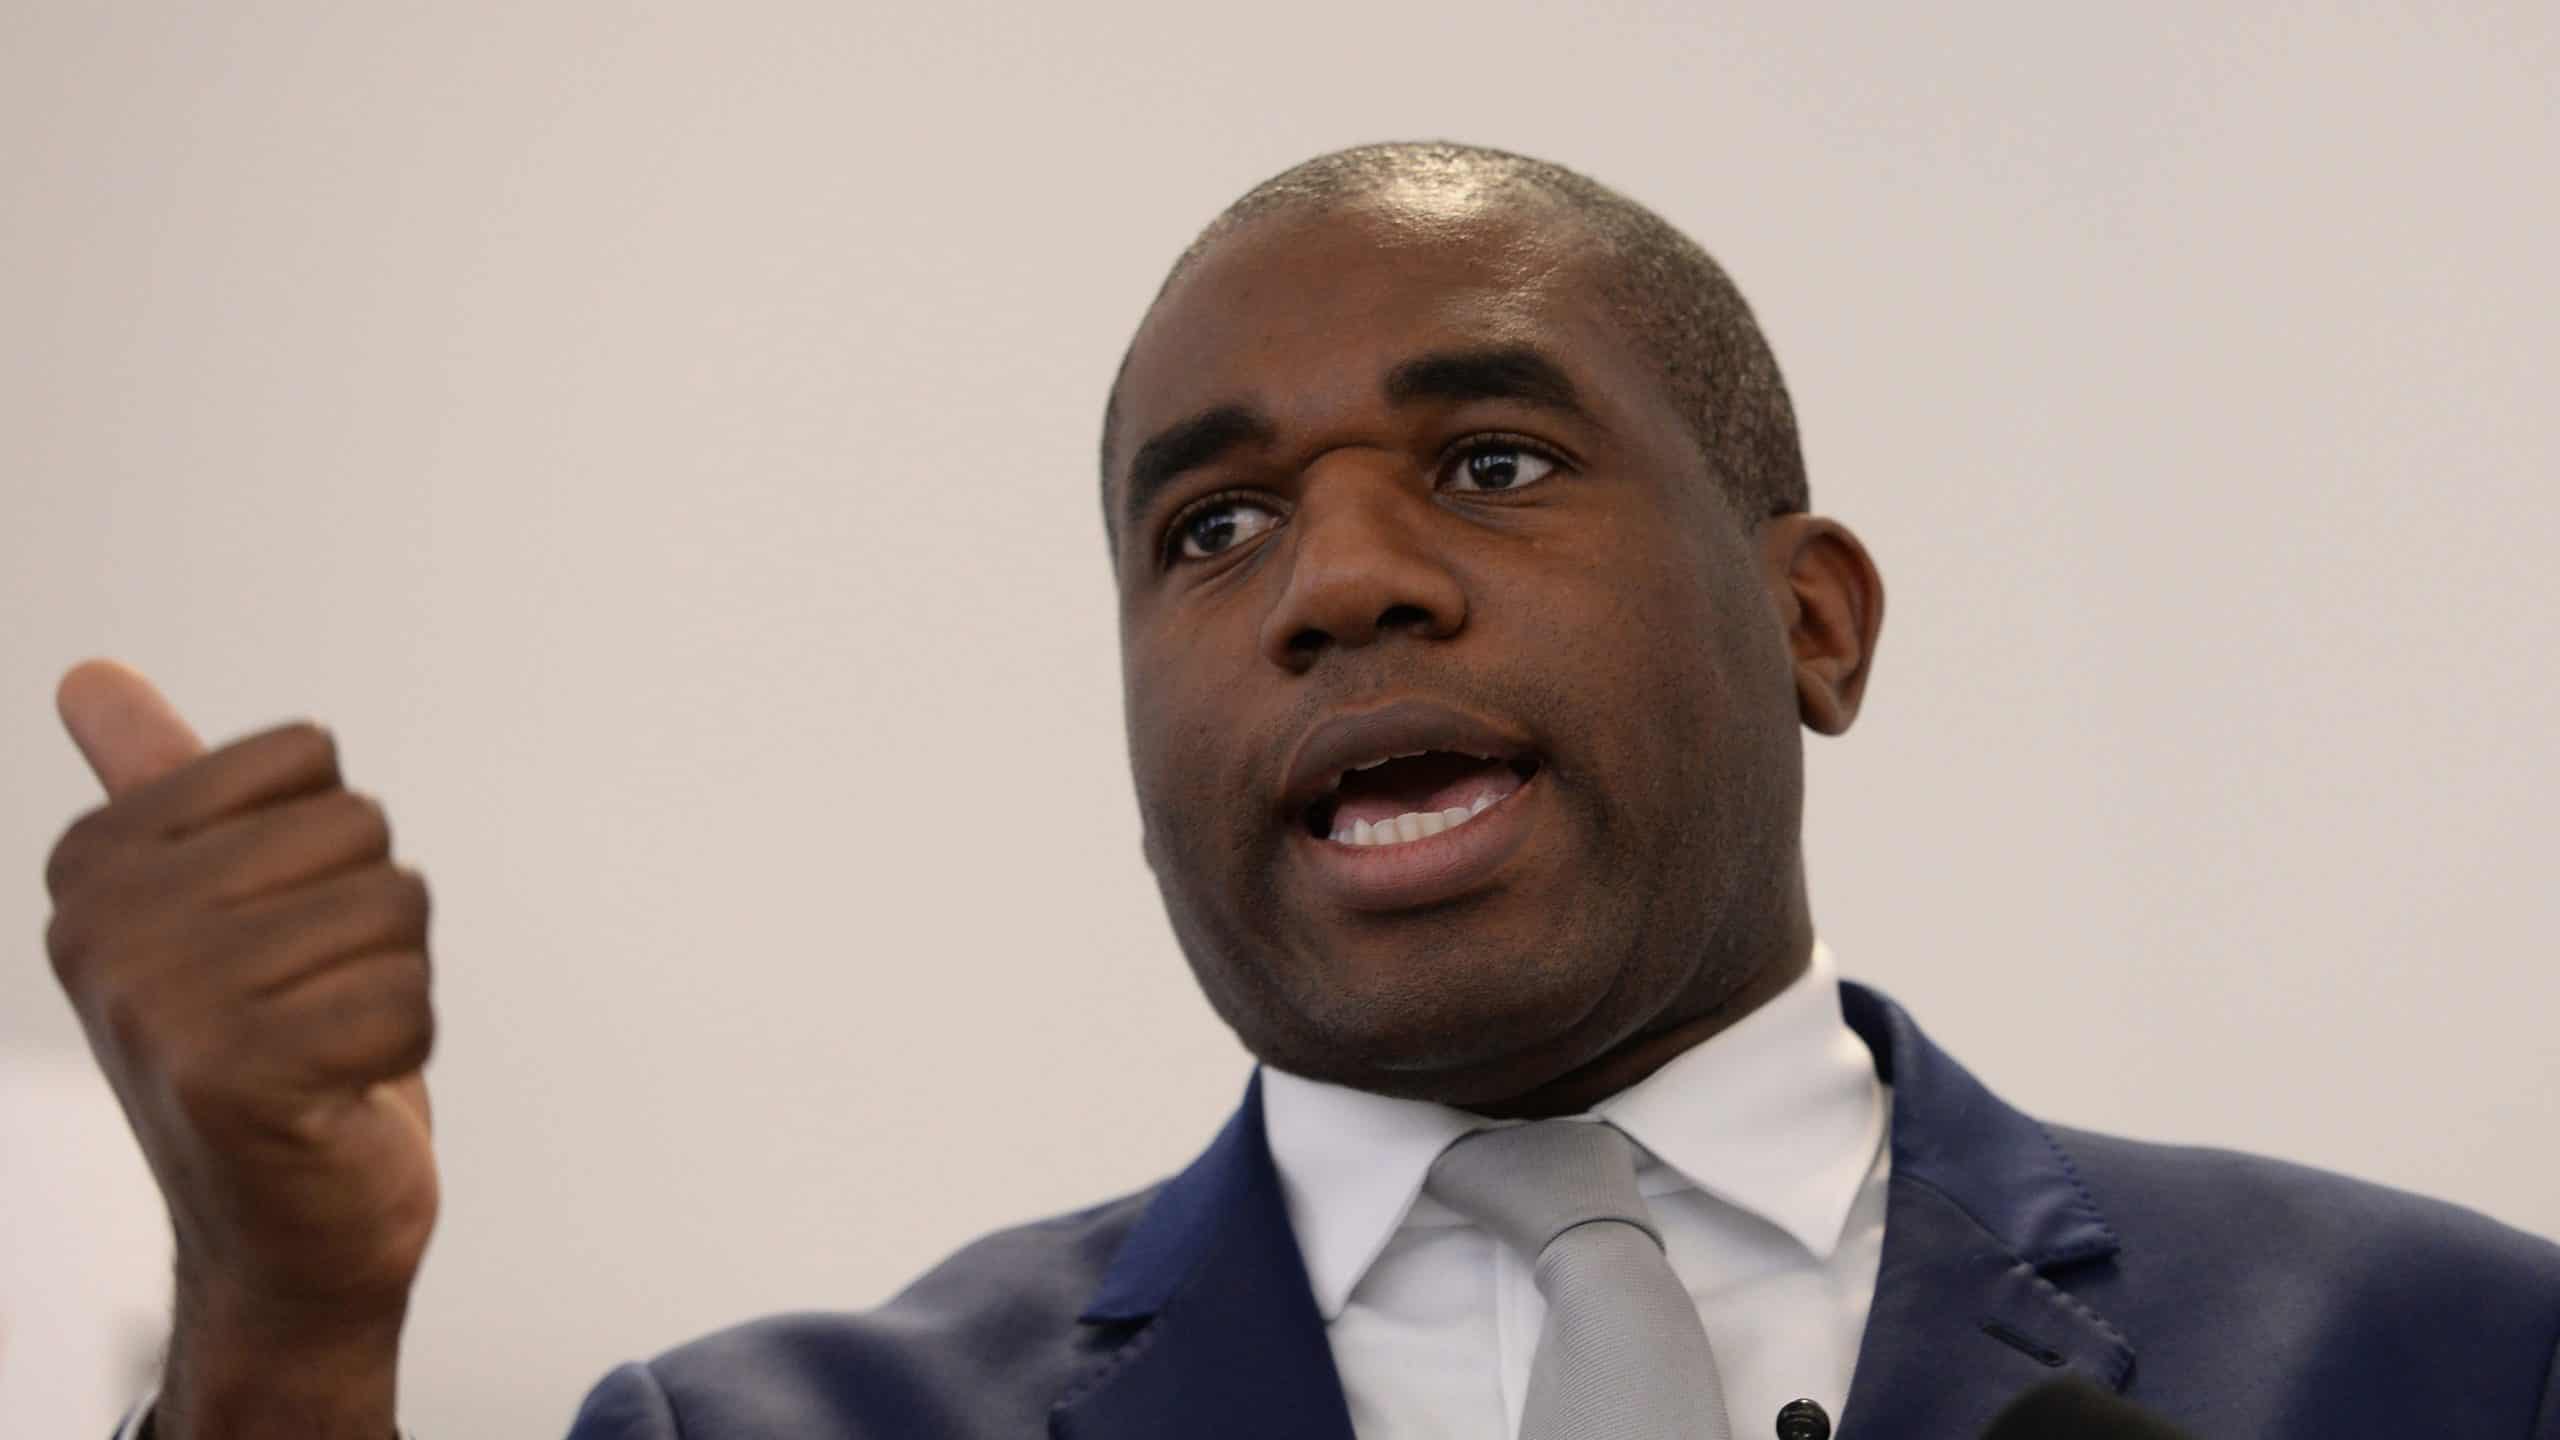 David Lammy asks why ‘Black English’ not an option on the census